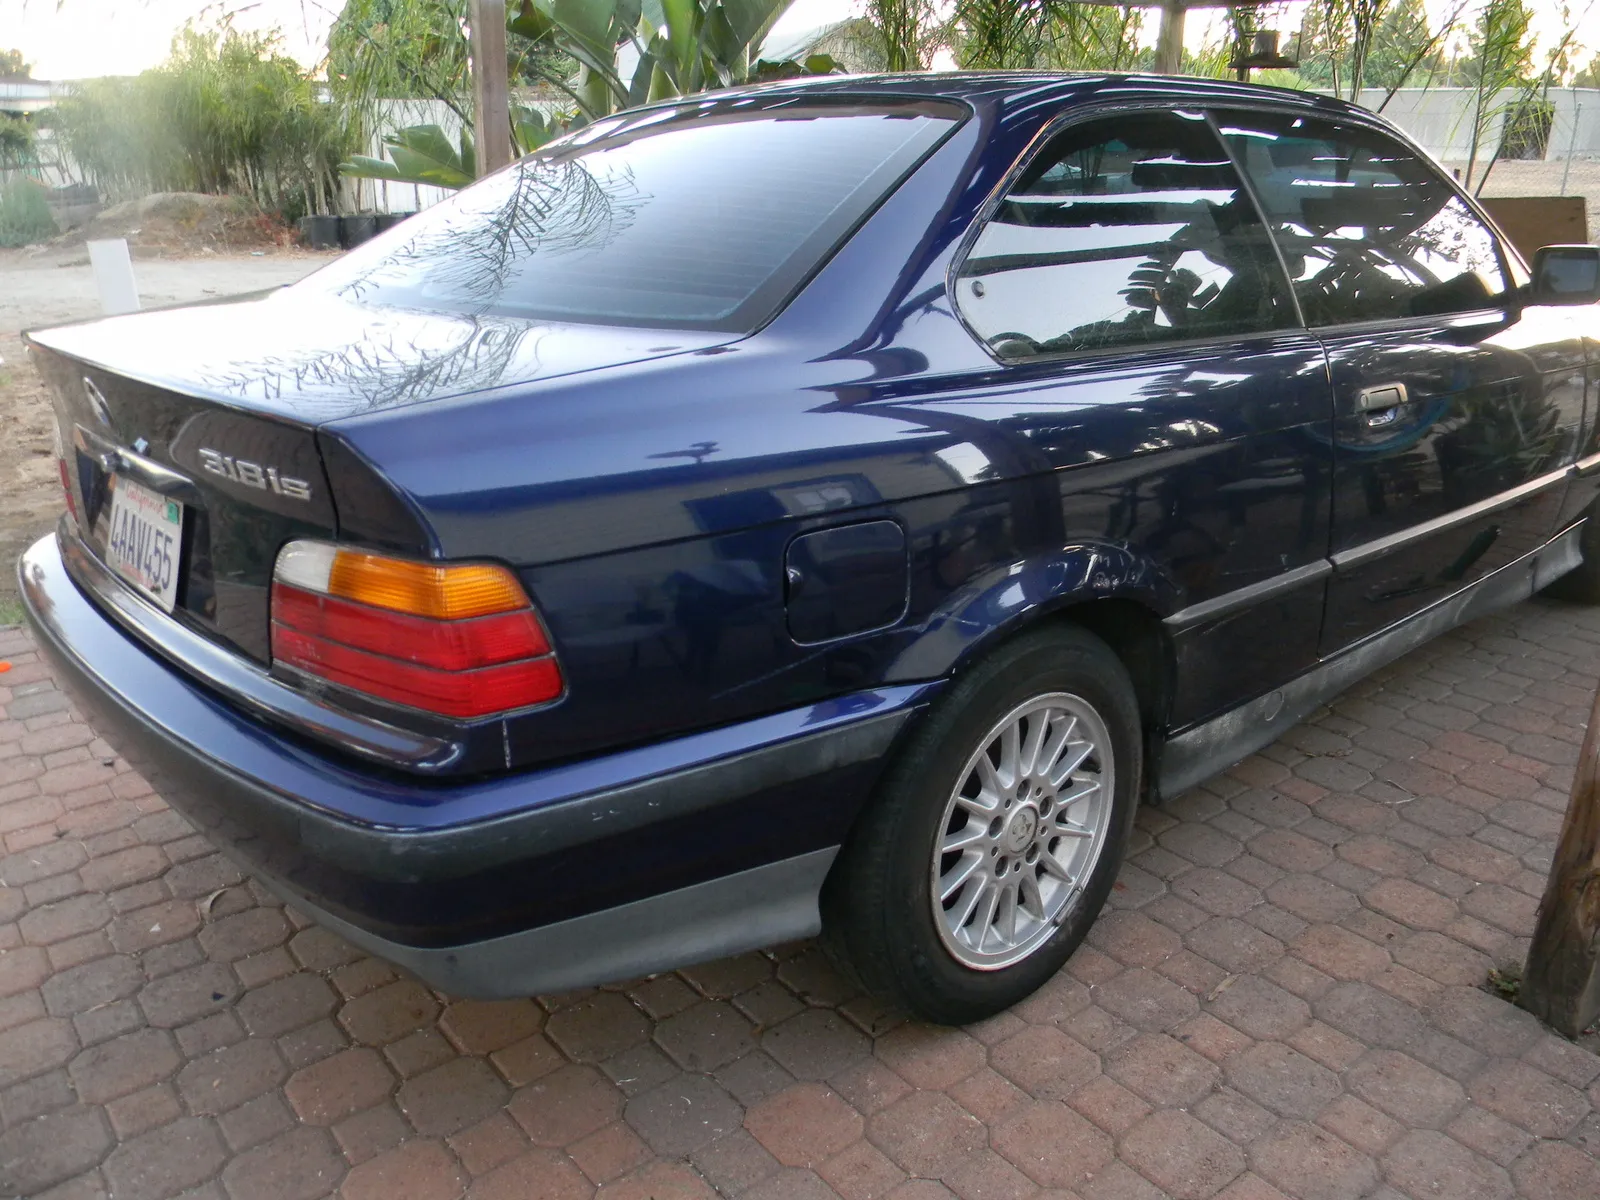 BMW 3 series 318is 1995 photo - 10